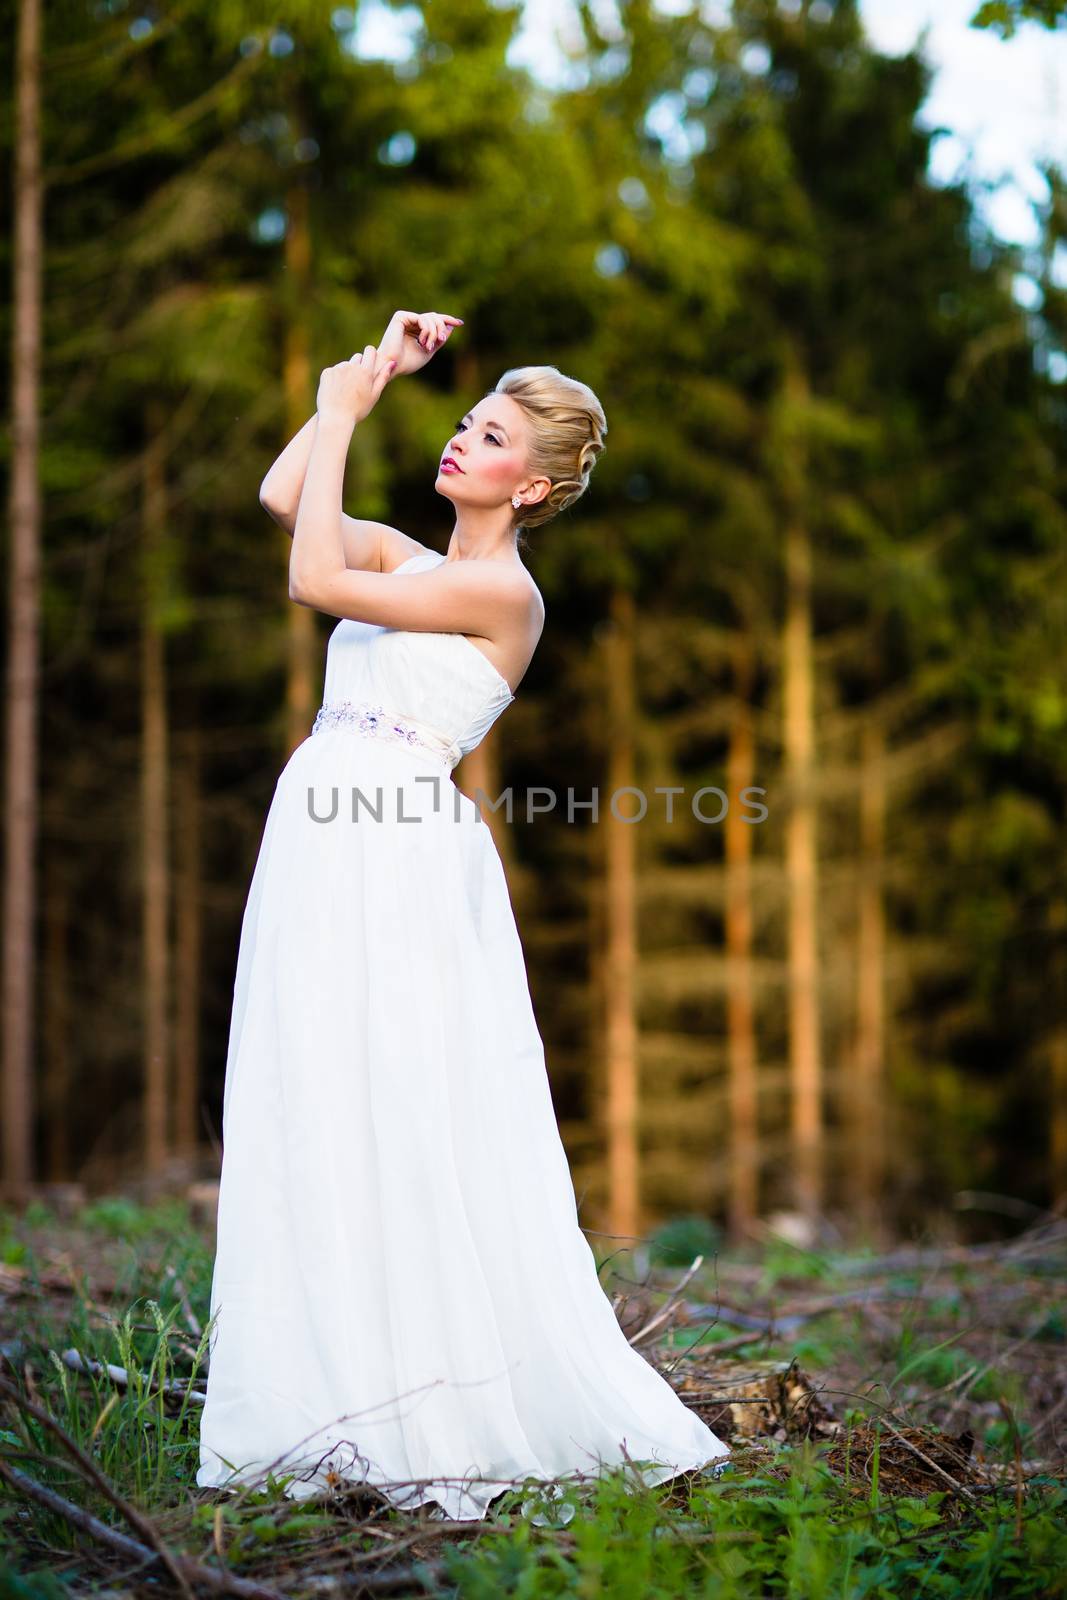 Lovely bride outdoors in a forest by viktor_cap